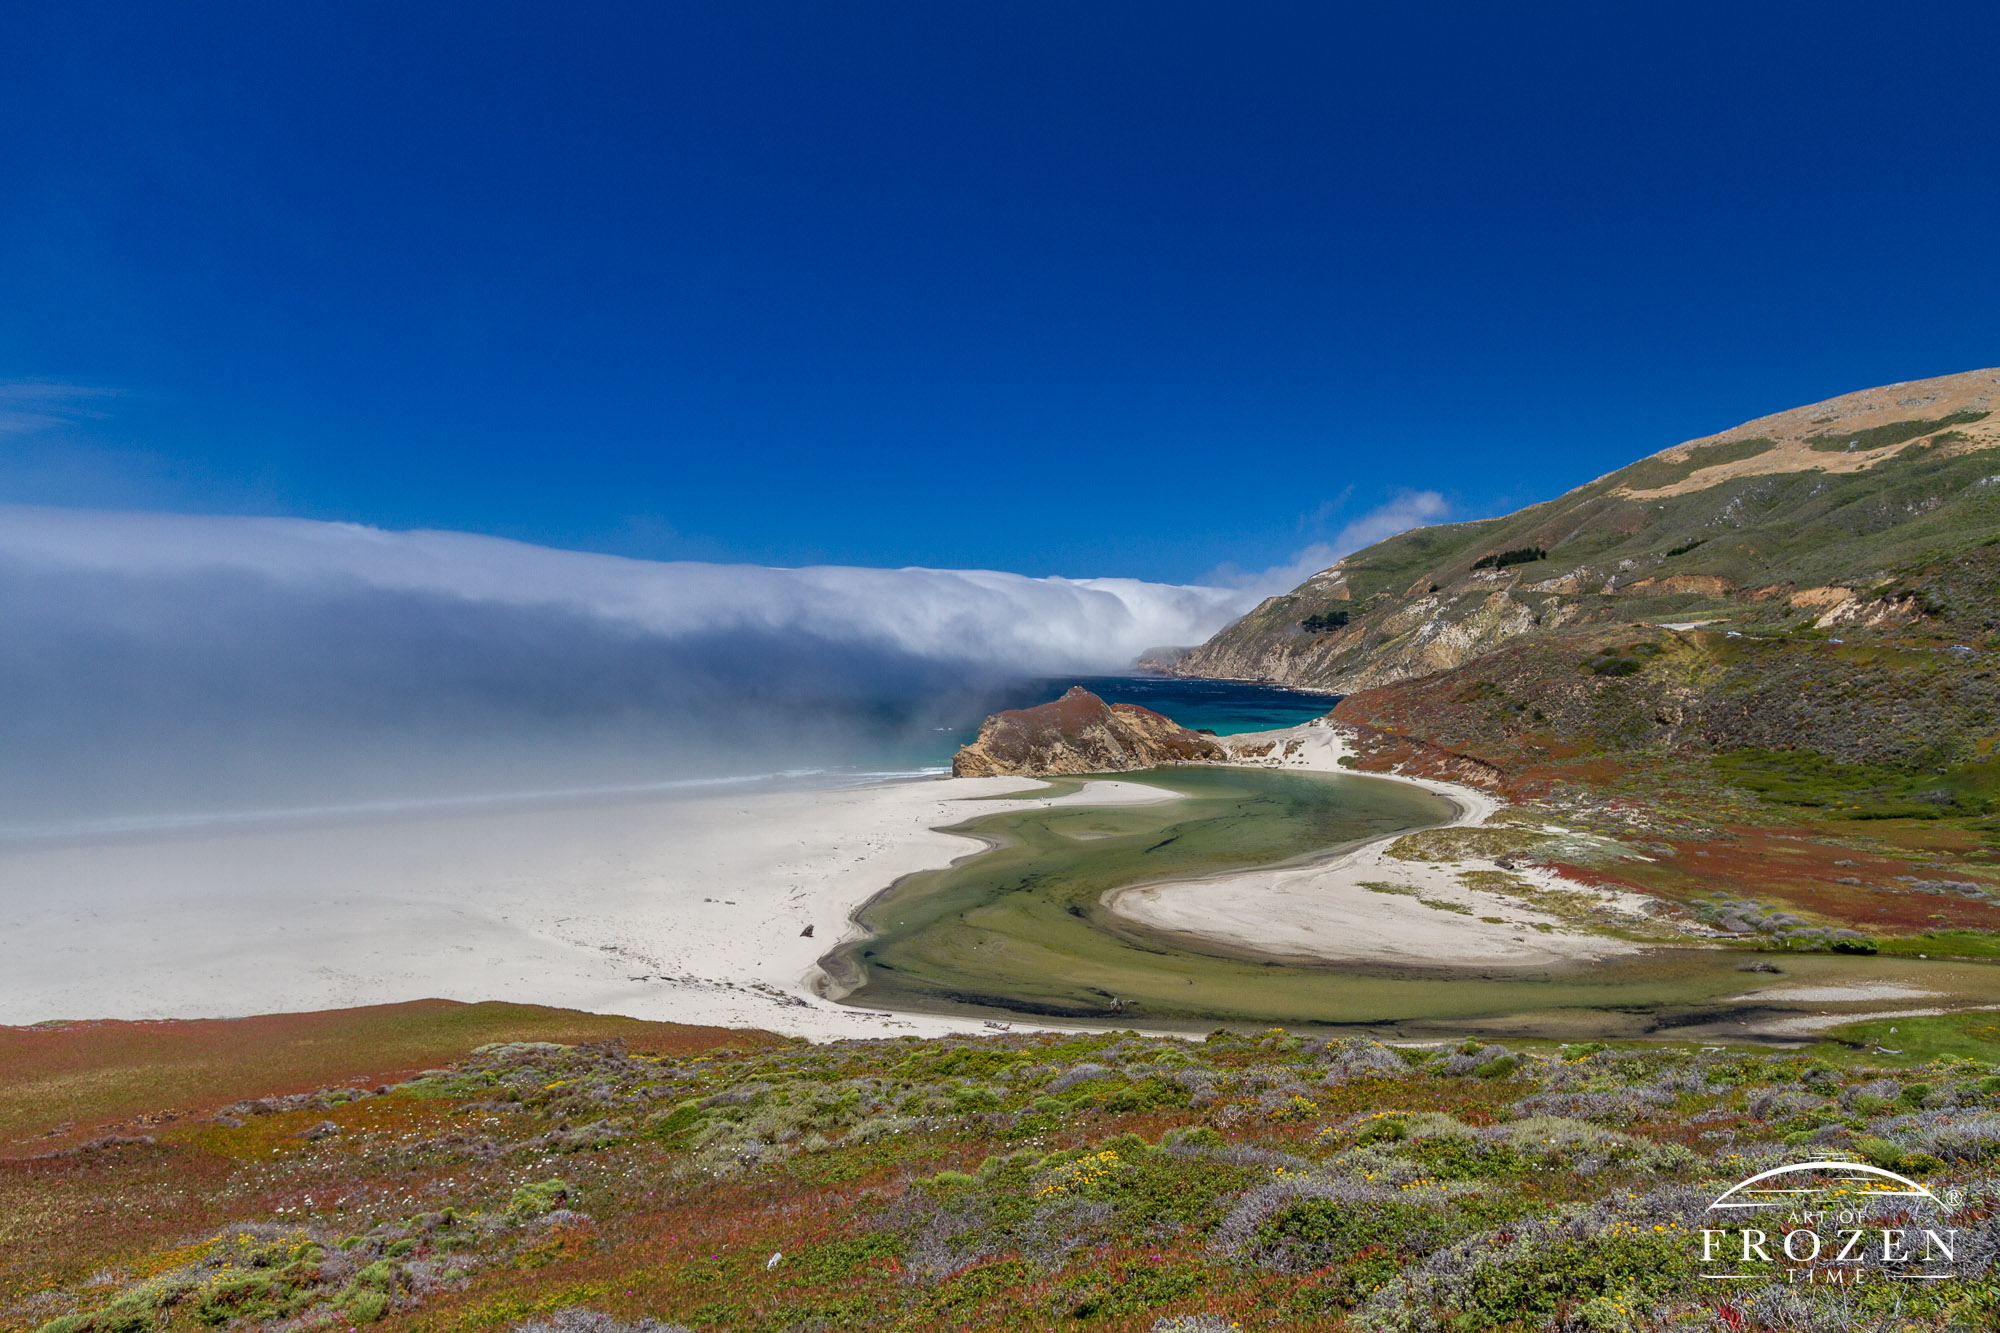 View from California State Route 1 along the Santa Lucia Mountains on a clear blue day with sea fog making its way onshore and the Little Sur River meandering towards the coast